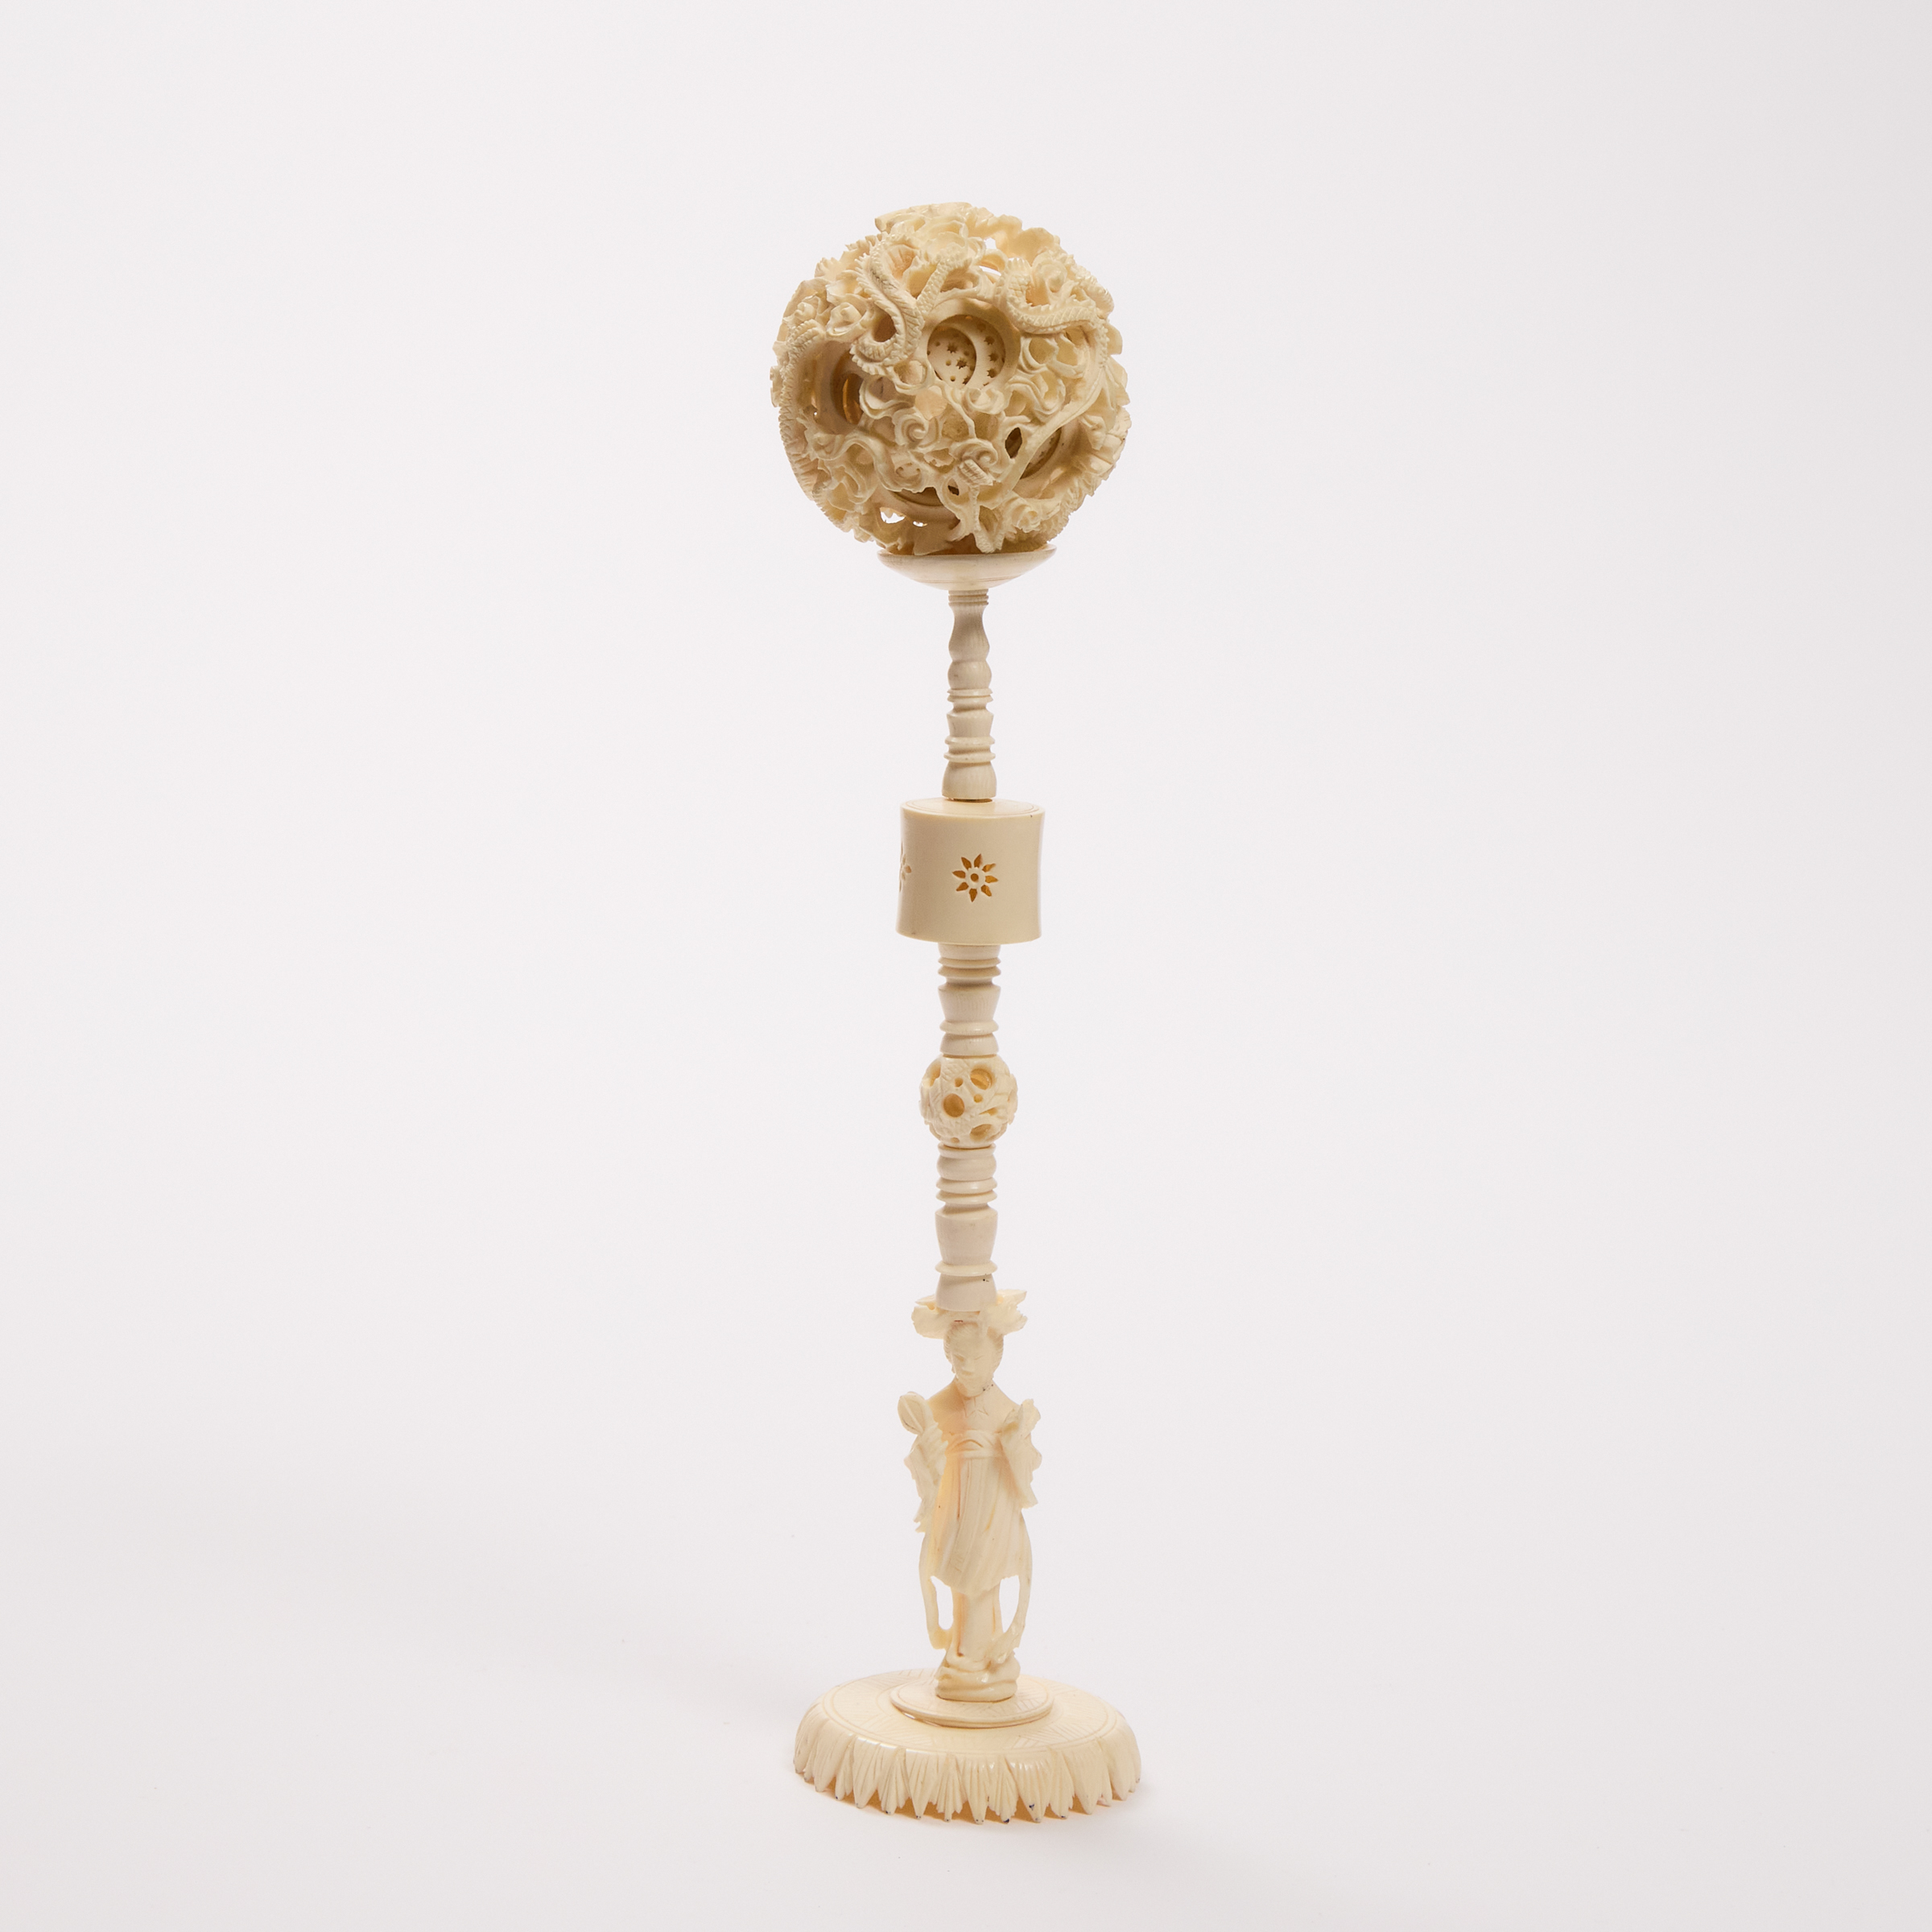 An Ivory Puzzle Ball and Stand,